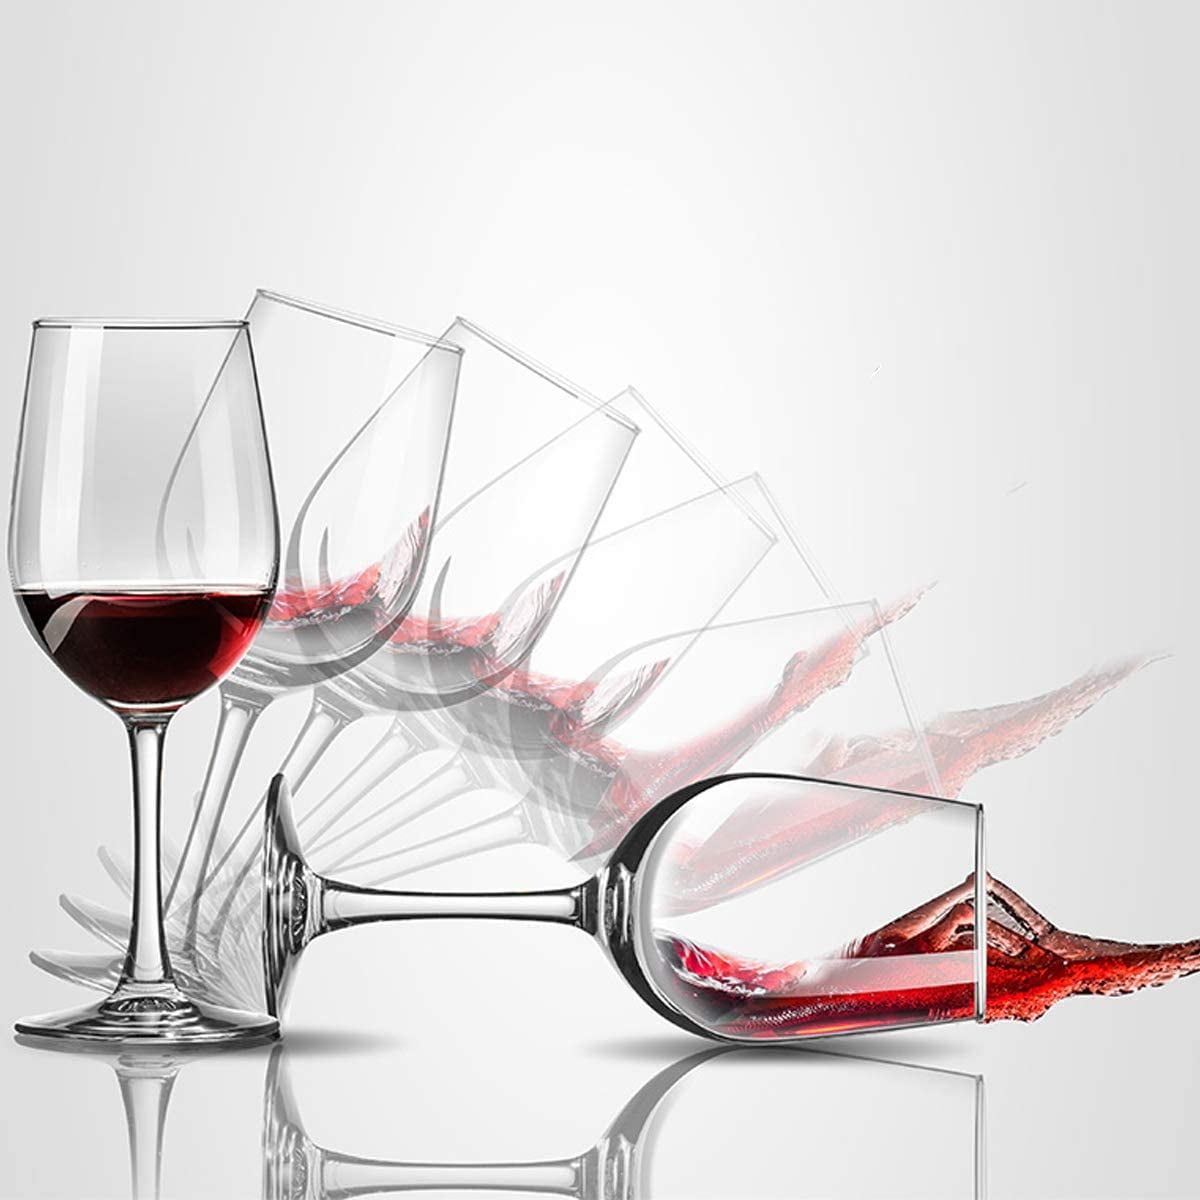 CZUMJJ Wine Glasses Set of 8, Crystal Wine Glasses For Red & White Wine,  Perfect for Weddings, Housewarmings - 16 OZ